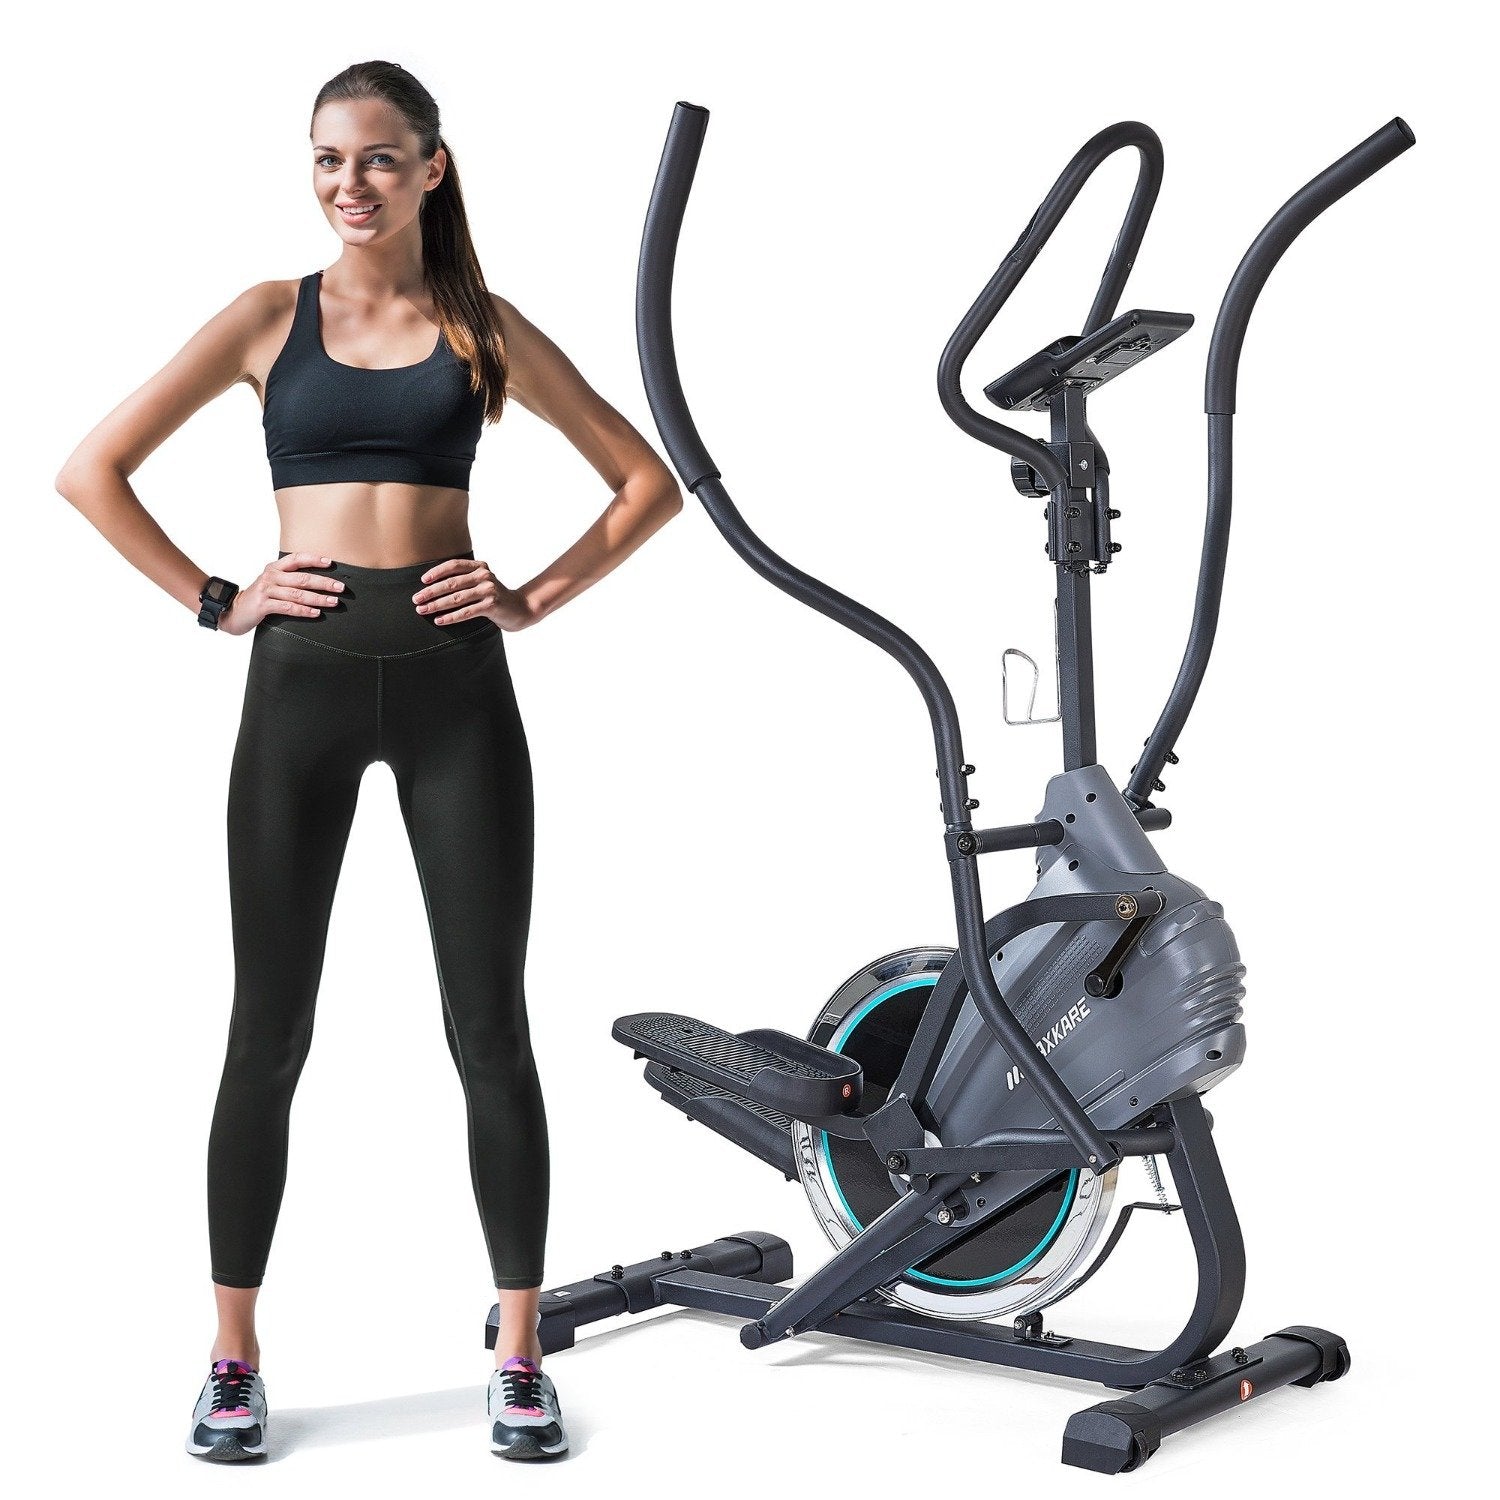 Load image into Gallery viewer, MaxKare Elliptical Climber Exercise Trainer Machines Cardio Stepping Training Magnetic Fywheel 3PCS Crank LCD Monitor 220 LBS Max Weight For Home Indoor Use - NAIPO
